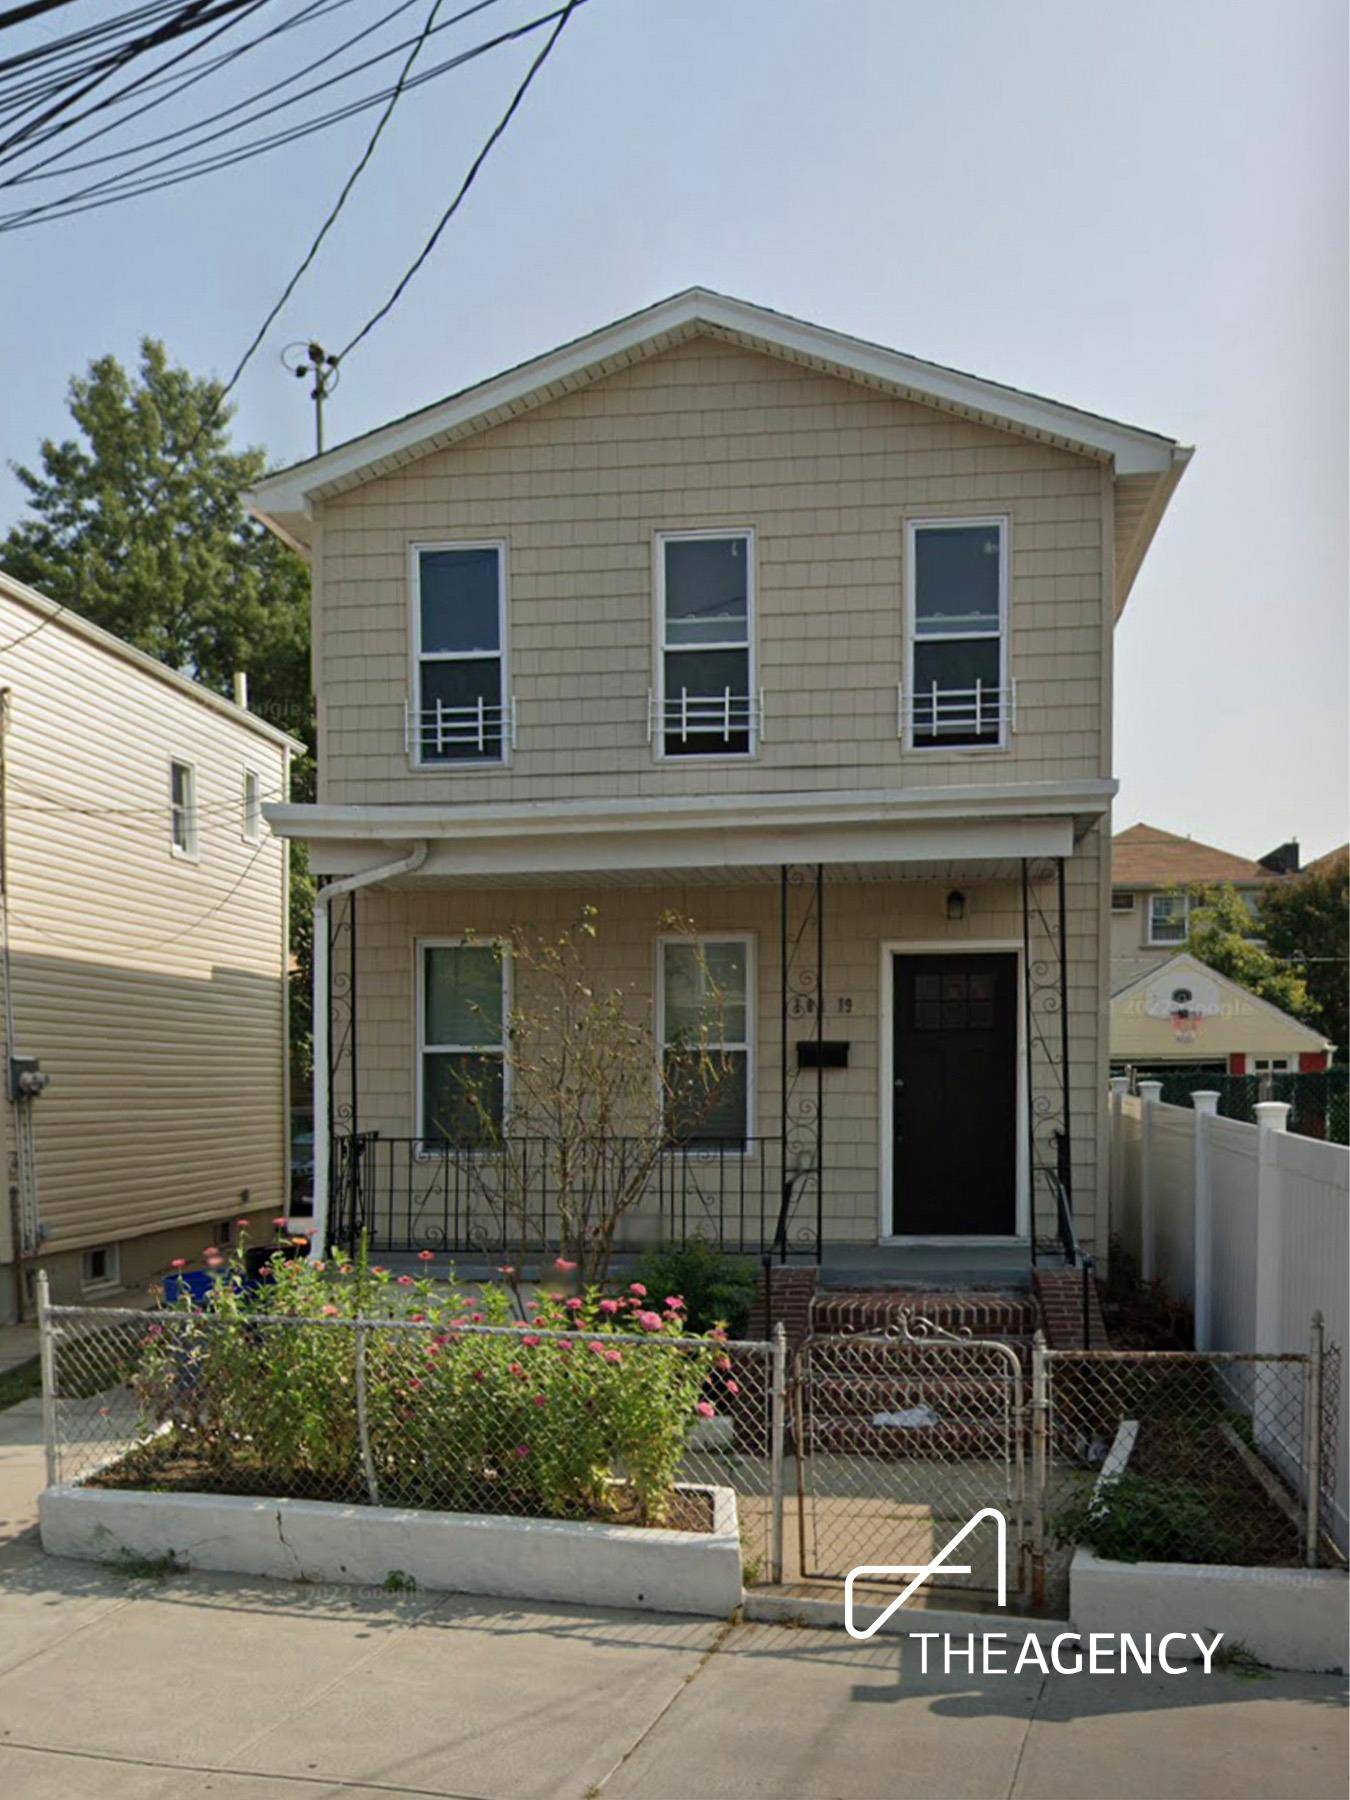 Welcome to Ozone Park, where this inviting detached 2 family residence awaits its new owners.